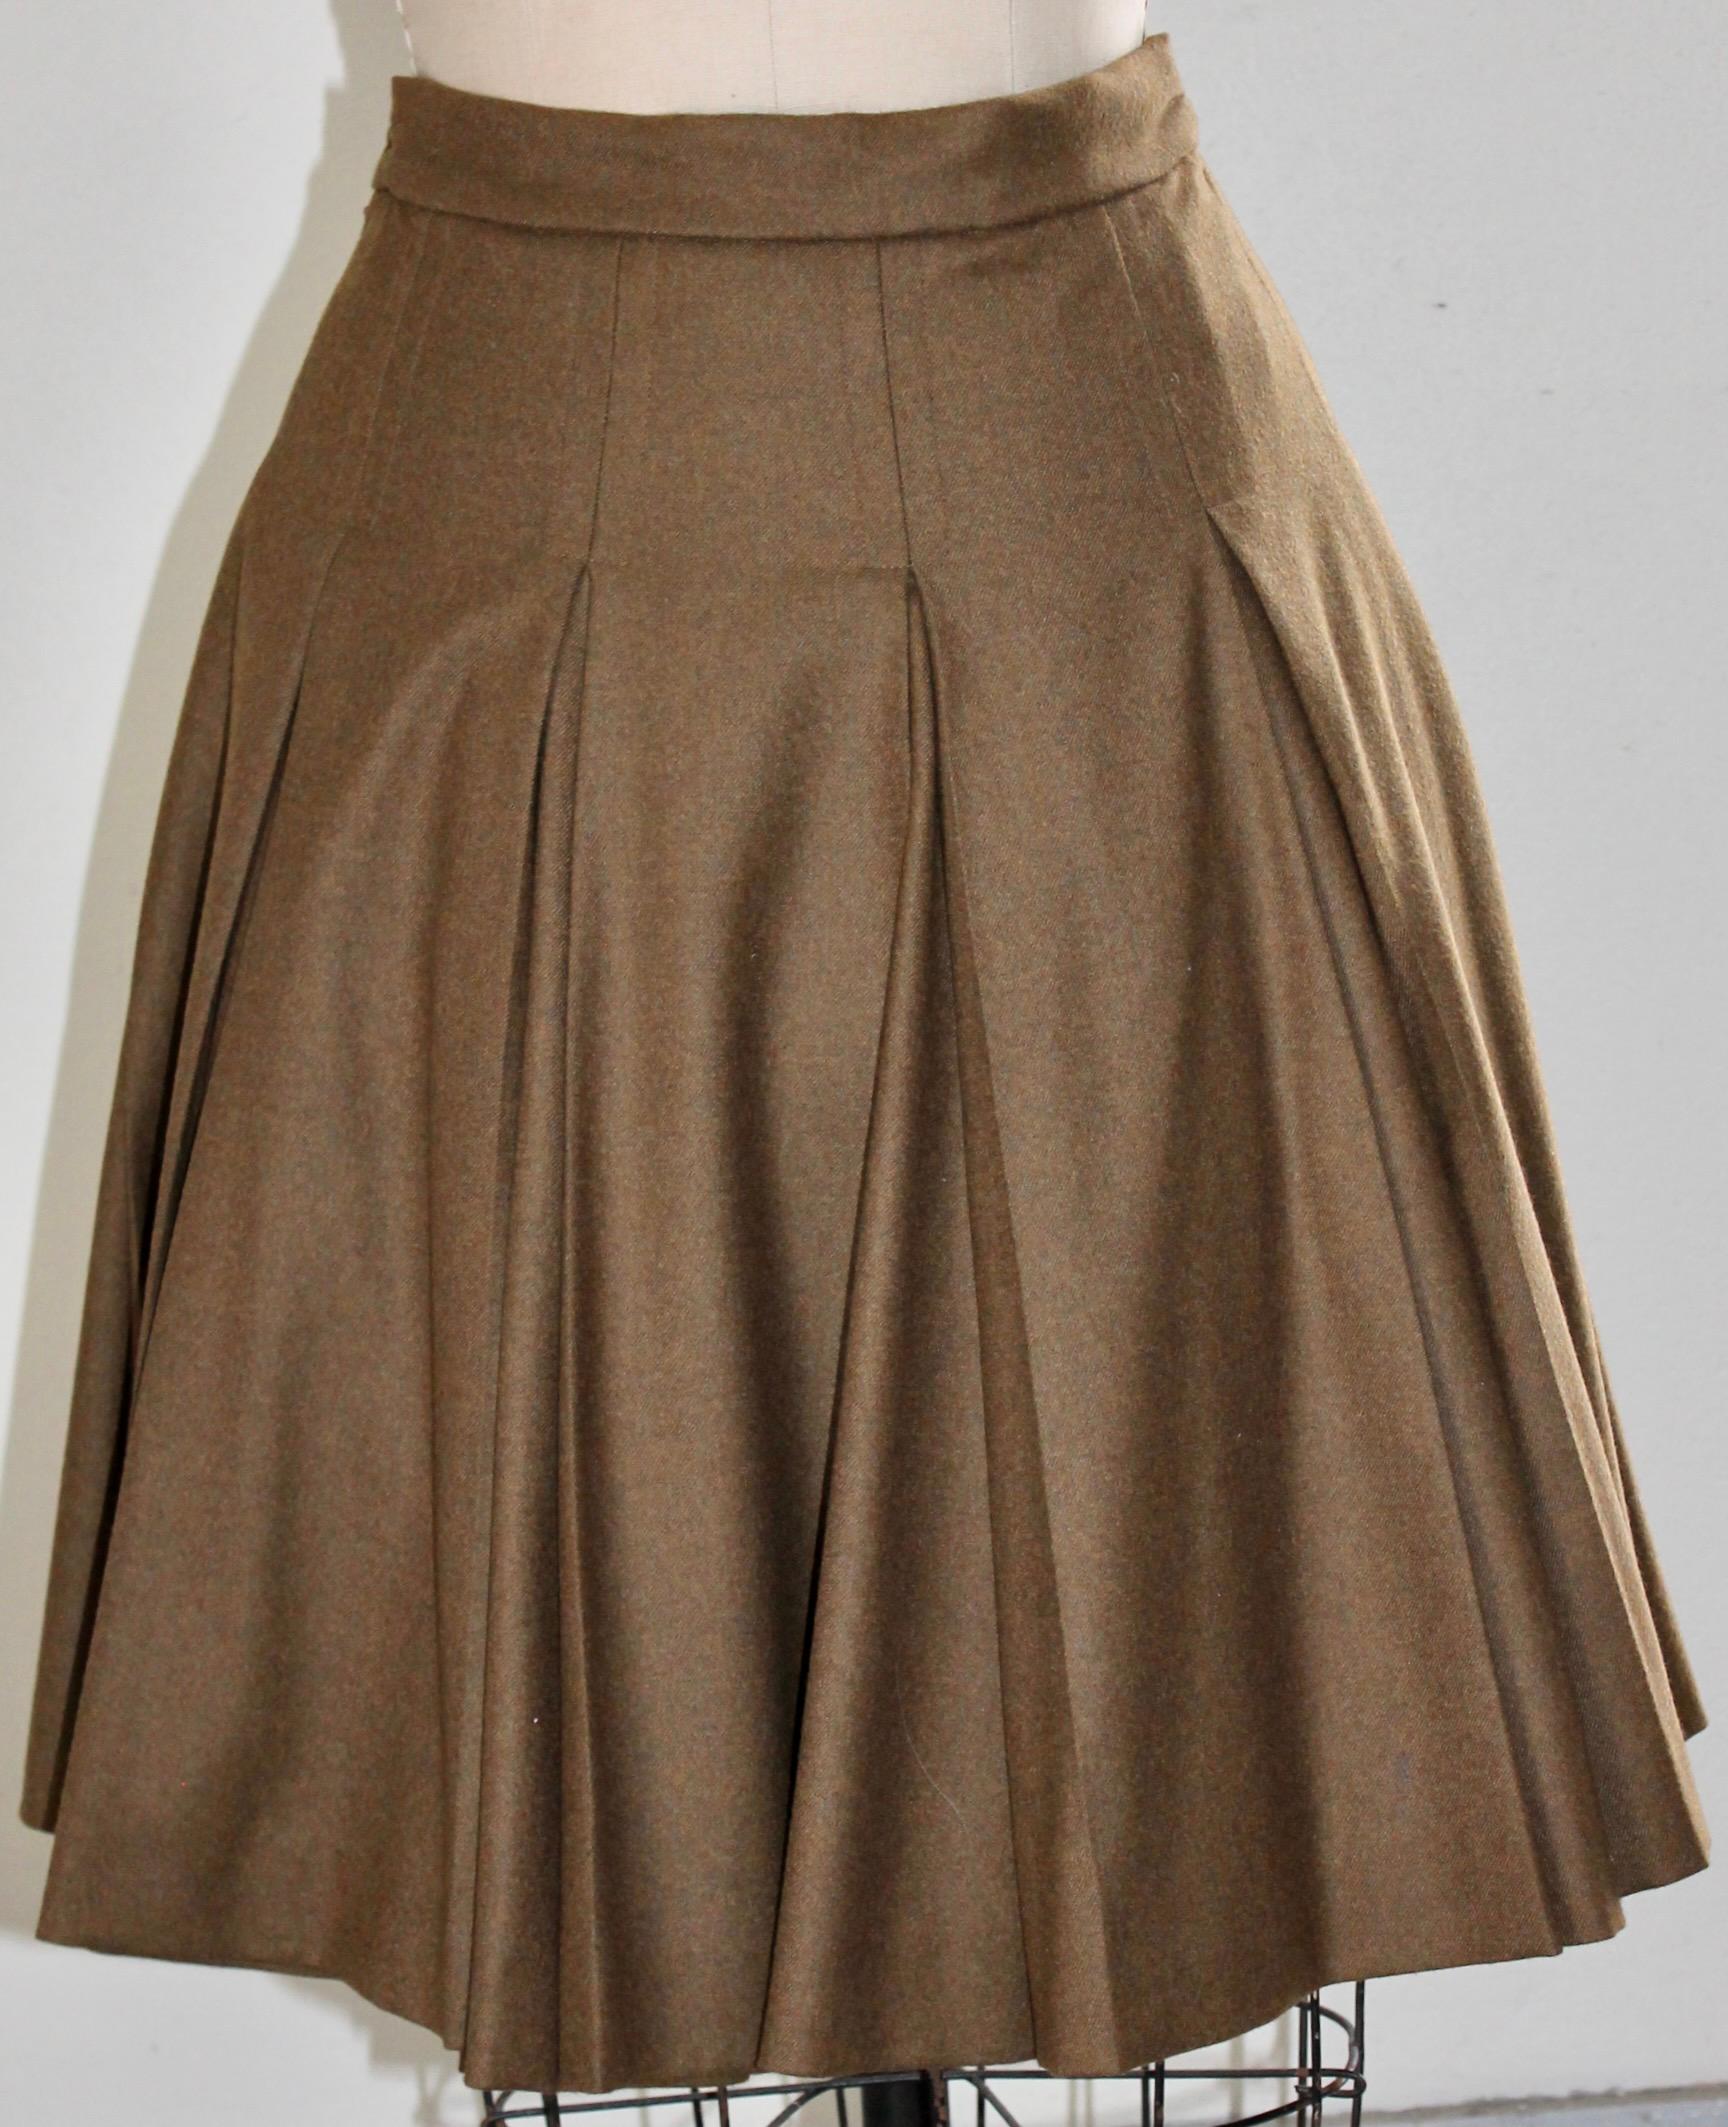 Chloe Brown Skirt In Good Condition For Sale In Sharon, CT